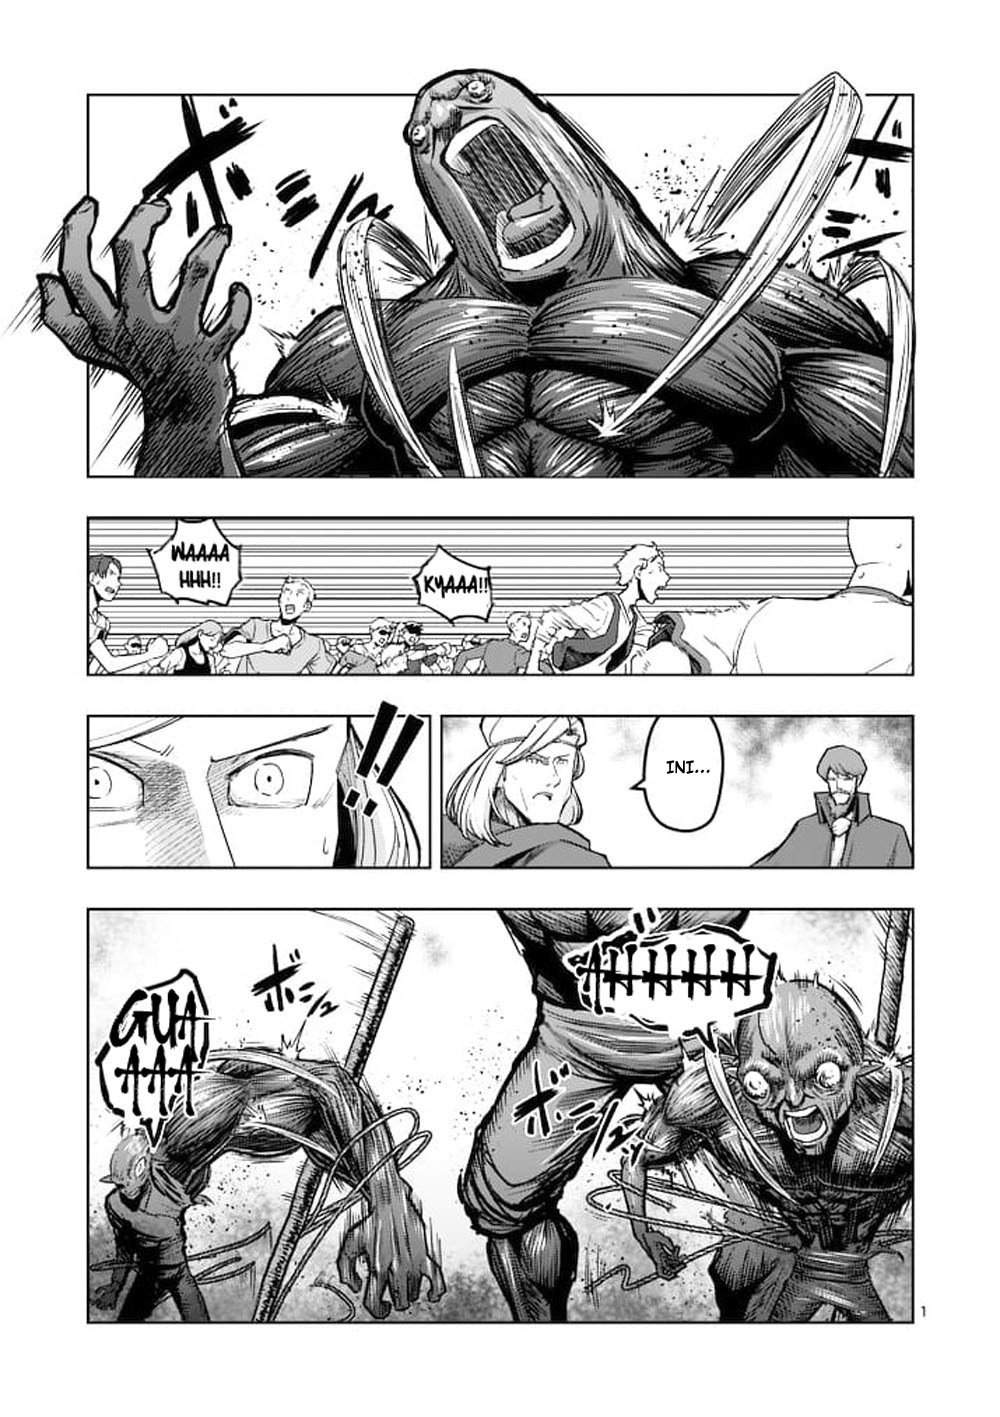 Helck Chapter 44